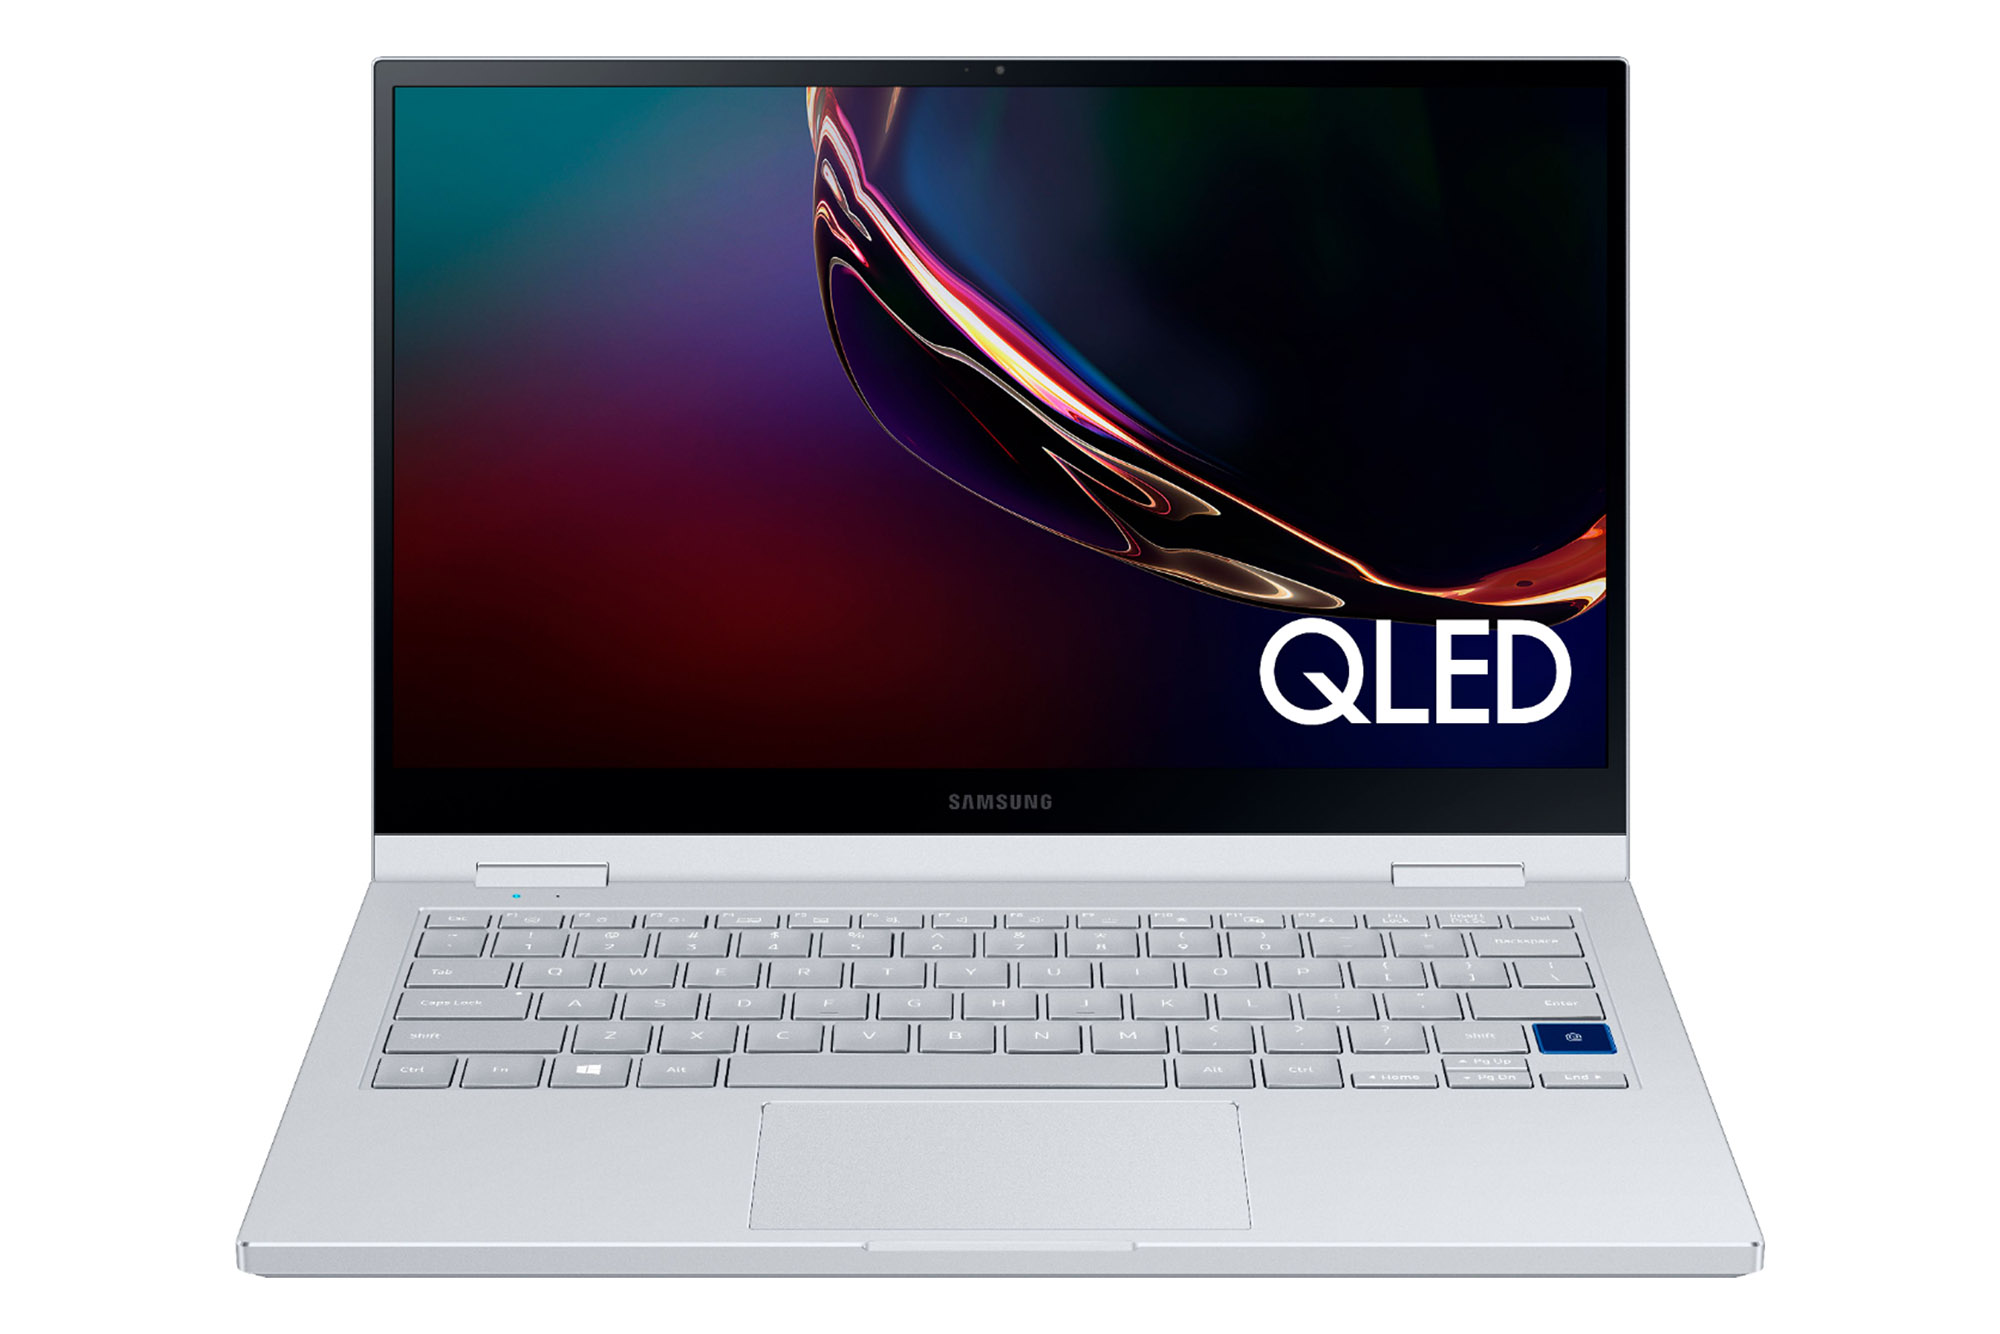 The Samsung Galaxy Book Flex2 Alpha with QLED touch display.